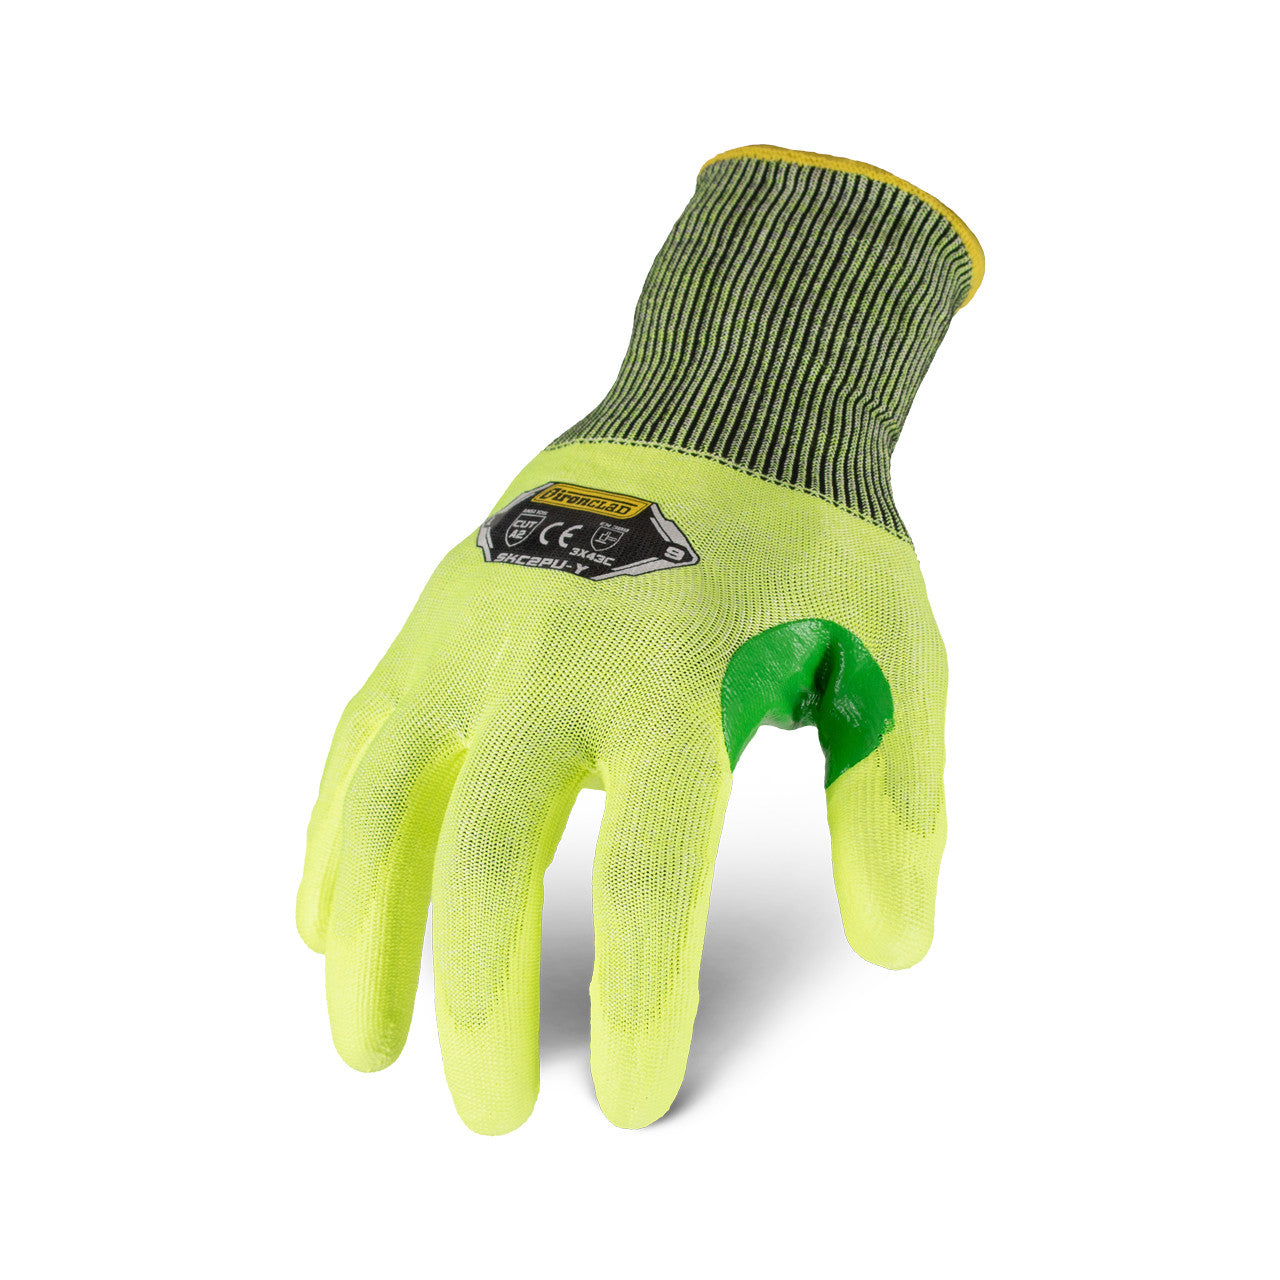 Ironclad KONG LPI OPEN CUFF Ansi Cut Level 4 IVE Gloves